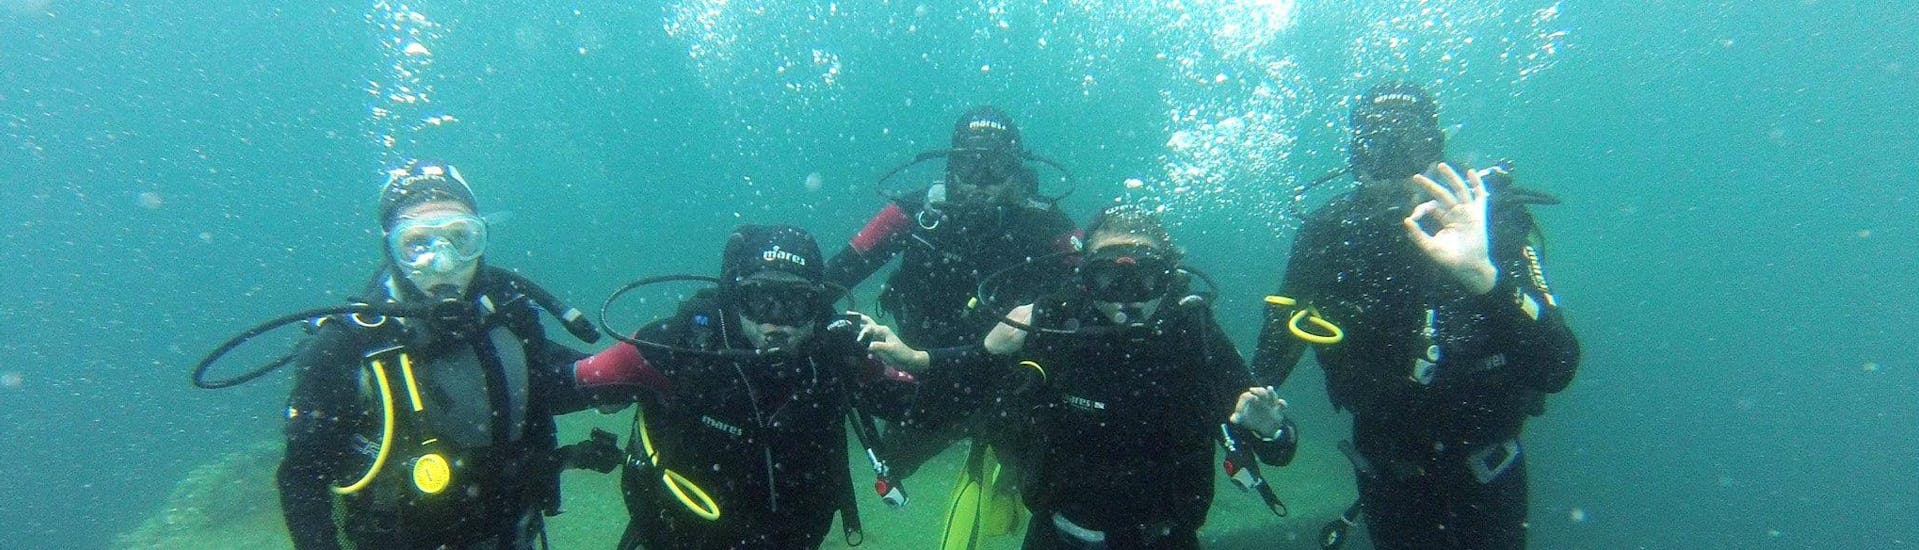 A group of friends are posing underwater during their PE12 & SSI/PADI Scuba Diver Course for Beginner with Le Kalliste Plongée.